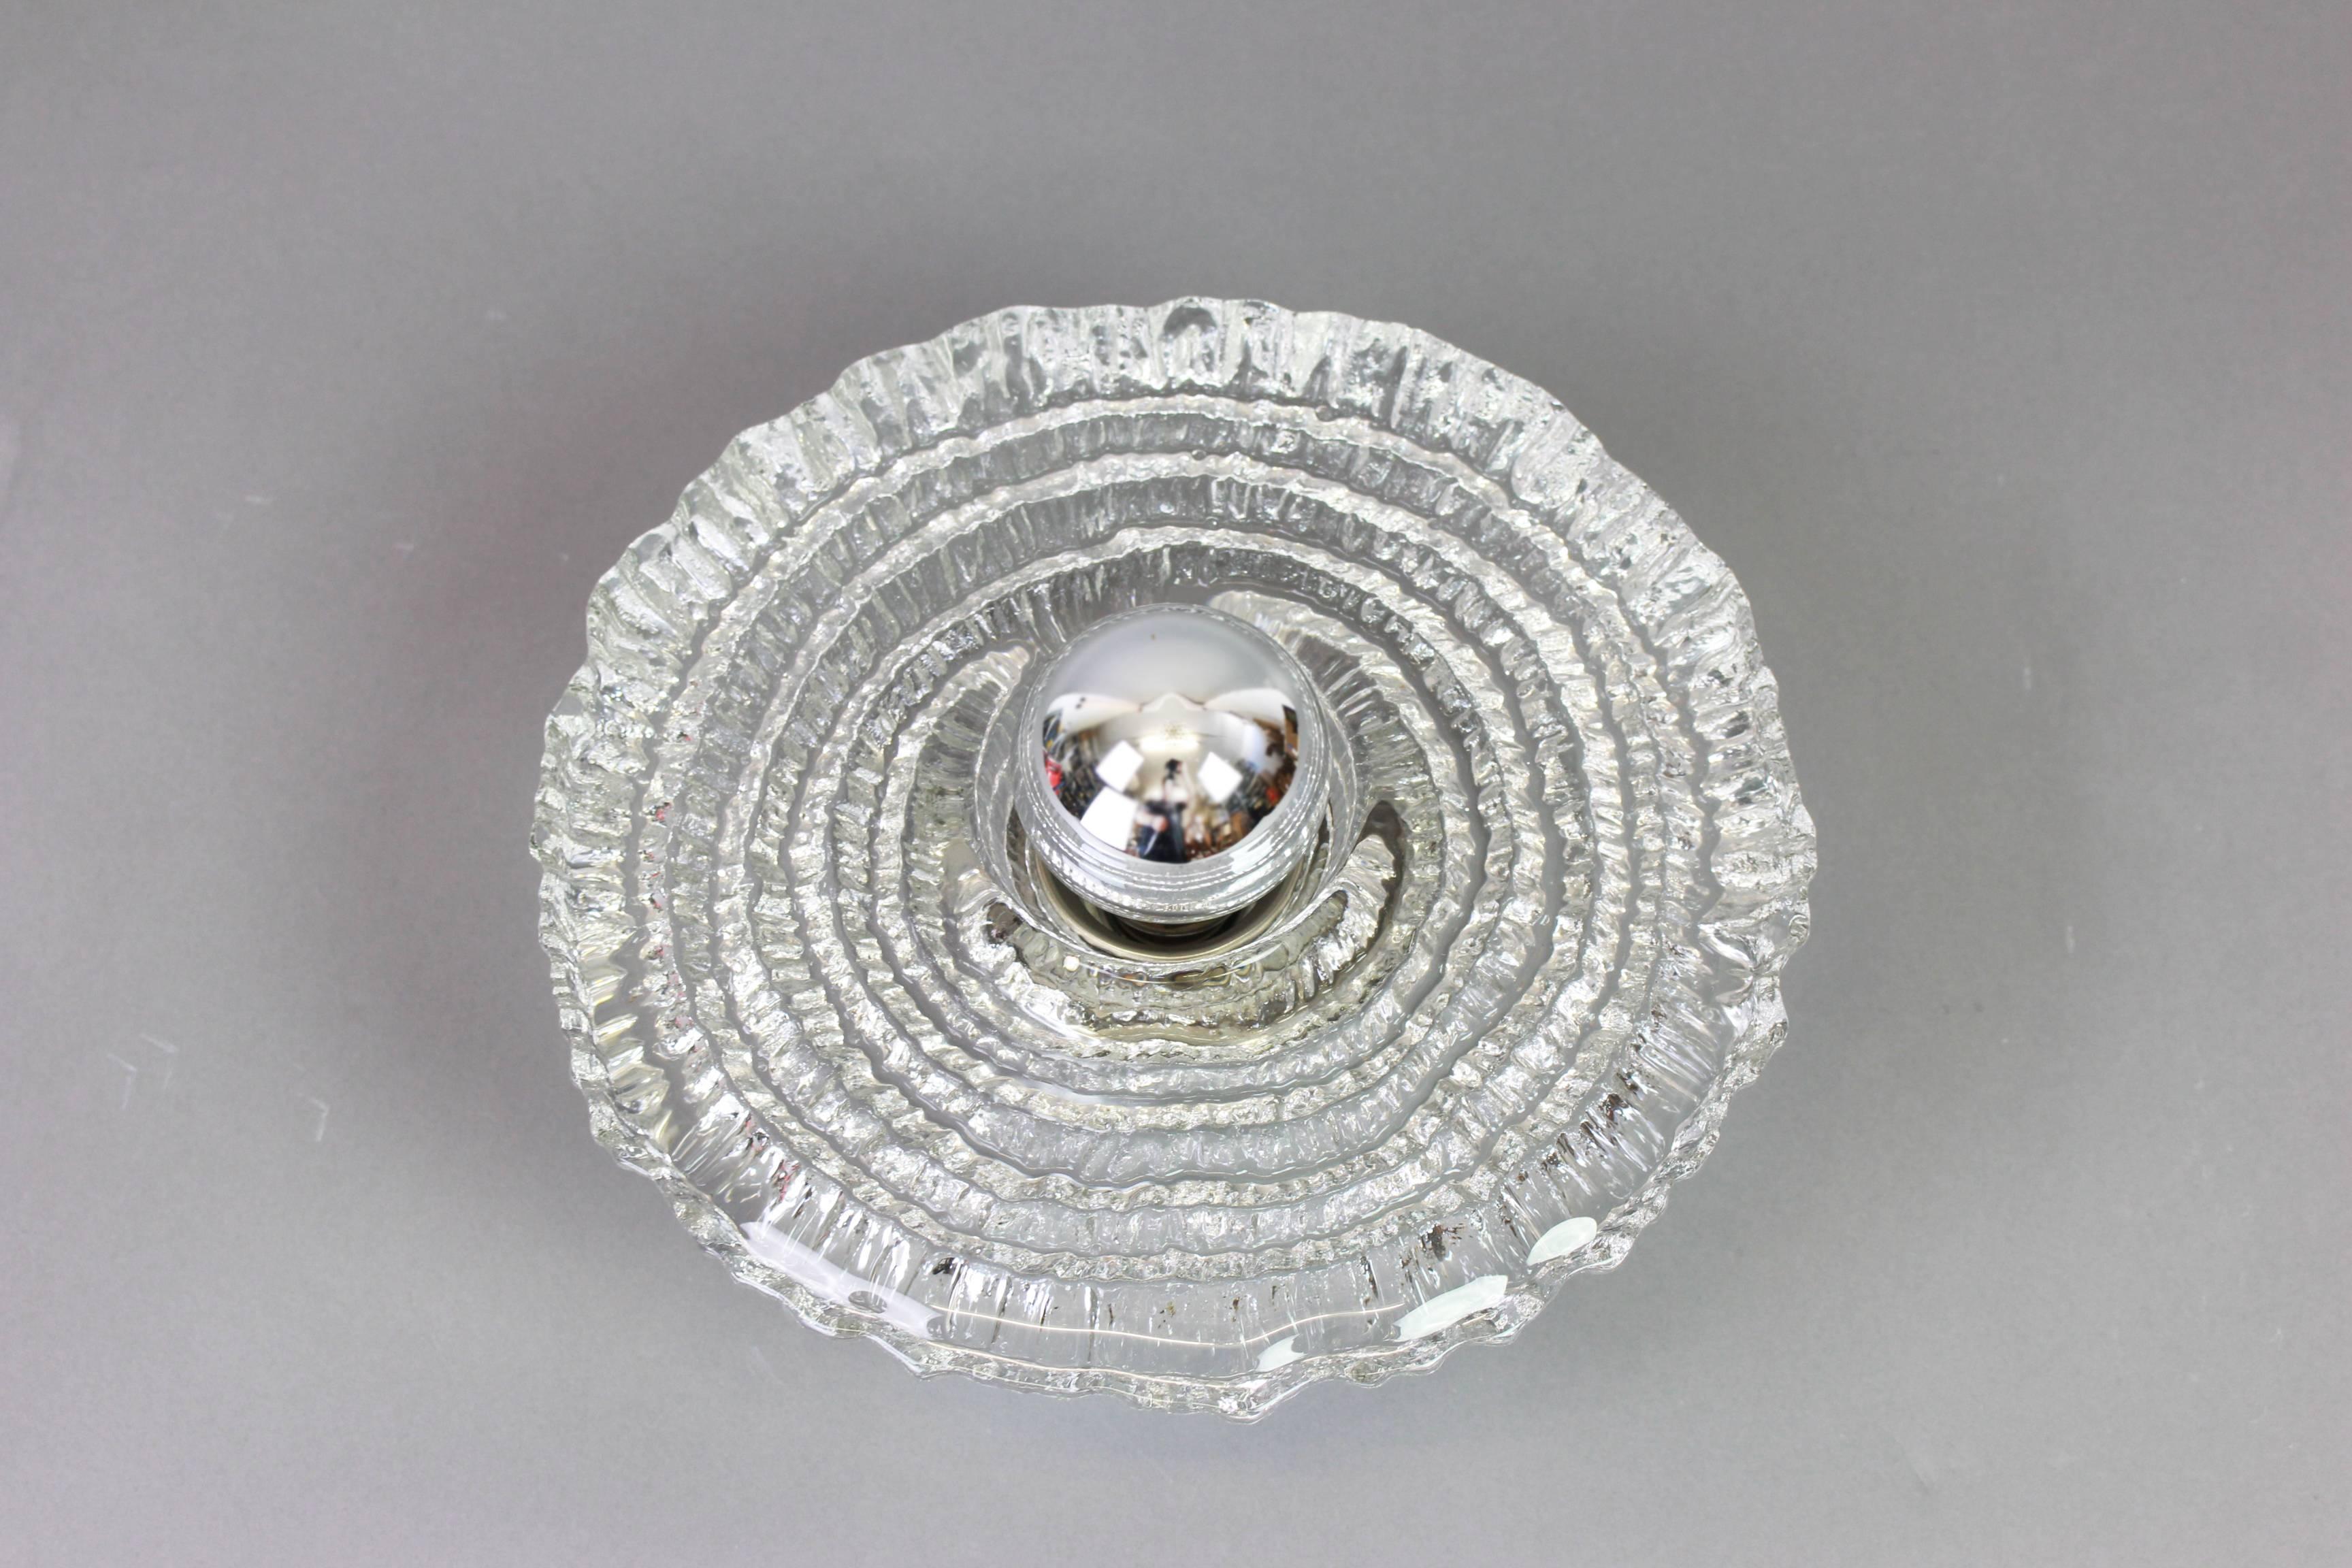 Exclusive Sputnik crystal glass wall sconce by Peil & Putzler, Germany, 1970s 
Wonderful light effect.
Extremely rare!

High quality and in very good condition. Cleaned, well-wired and ready to use. 

Each fixture requires 1 x E27 Standard bulb and